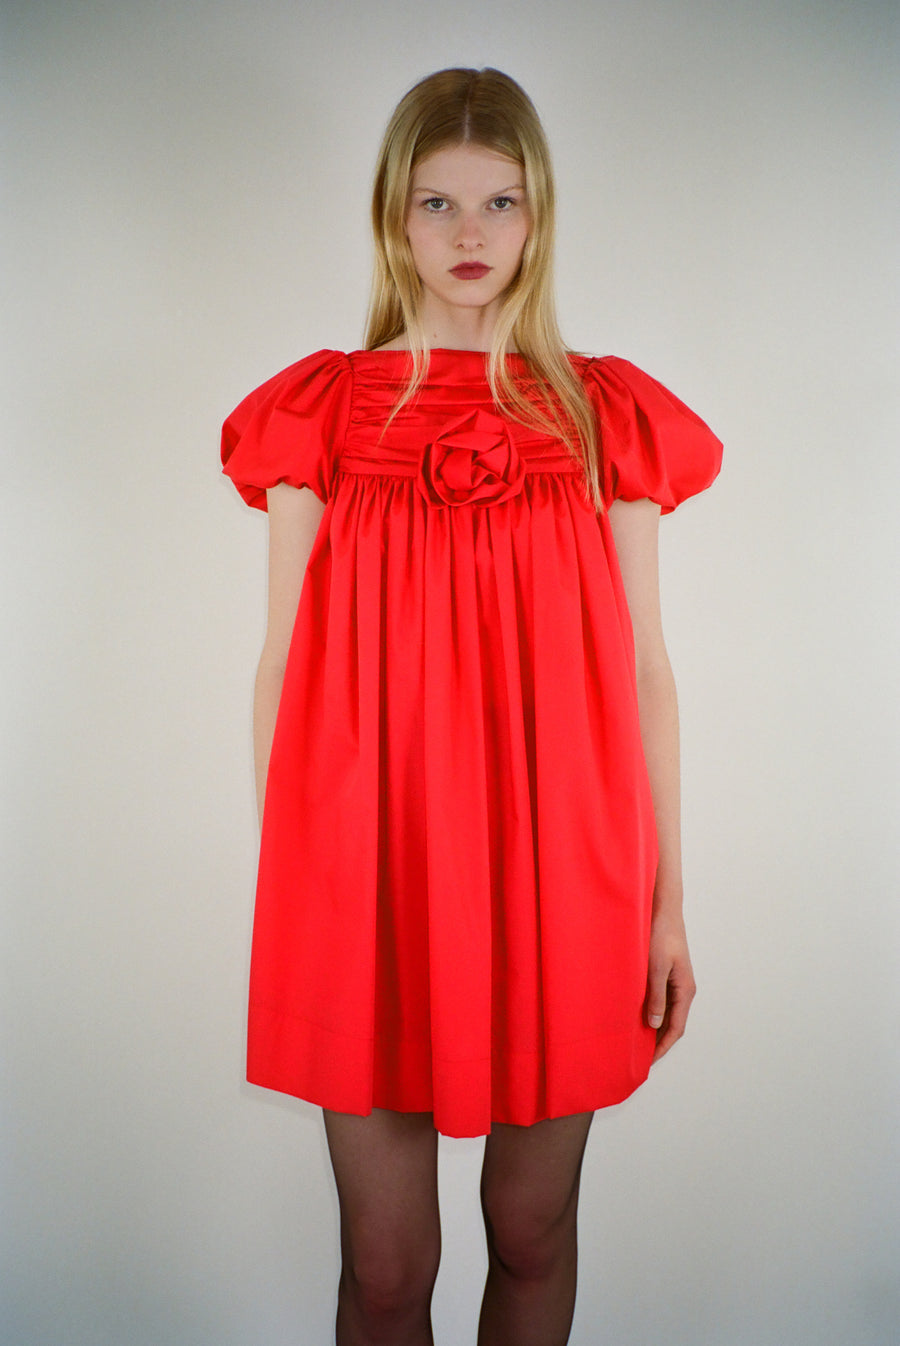 Babydoll mini dress with puffed sleeves in red on model